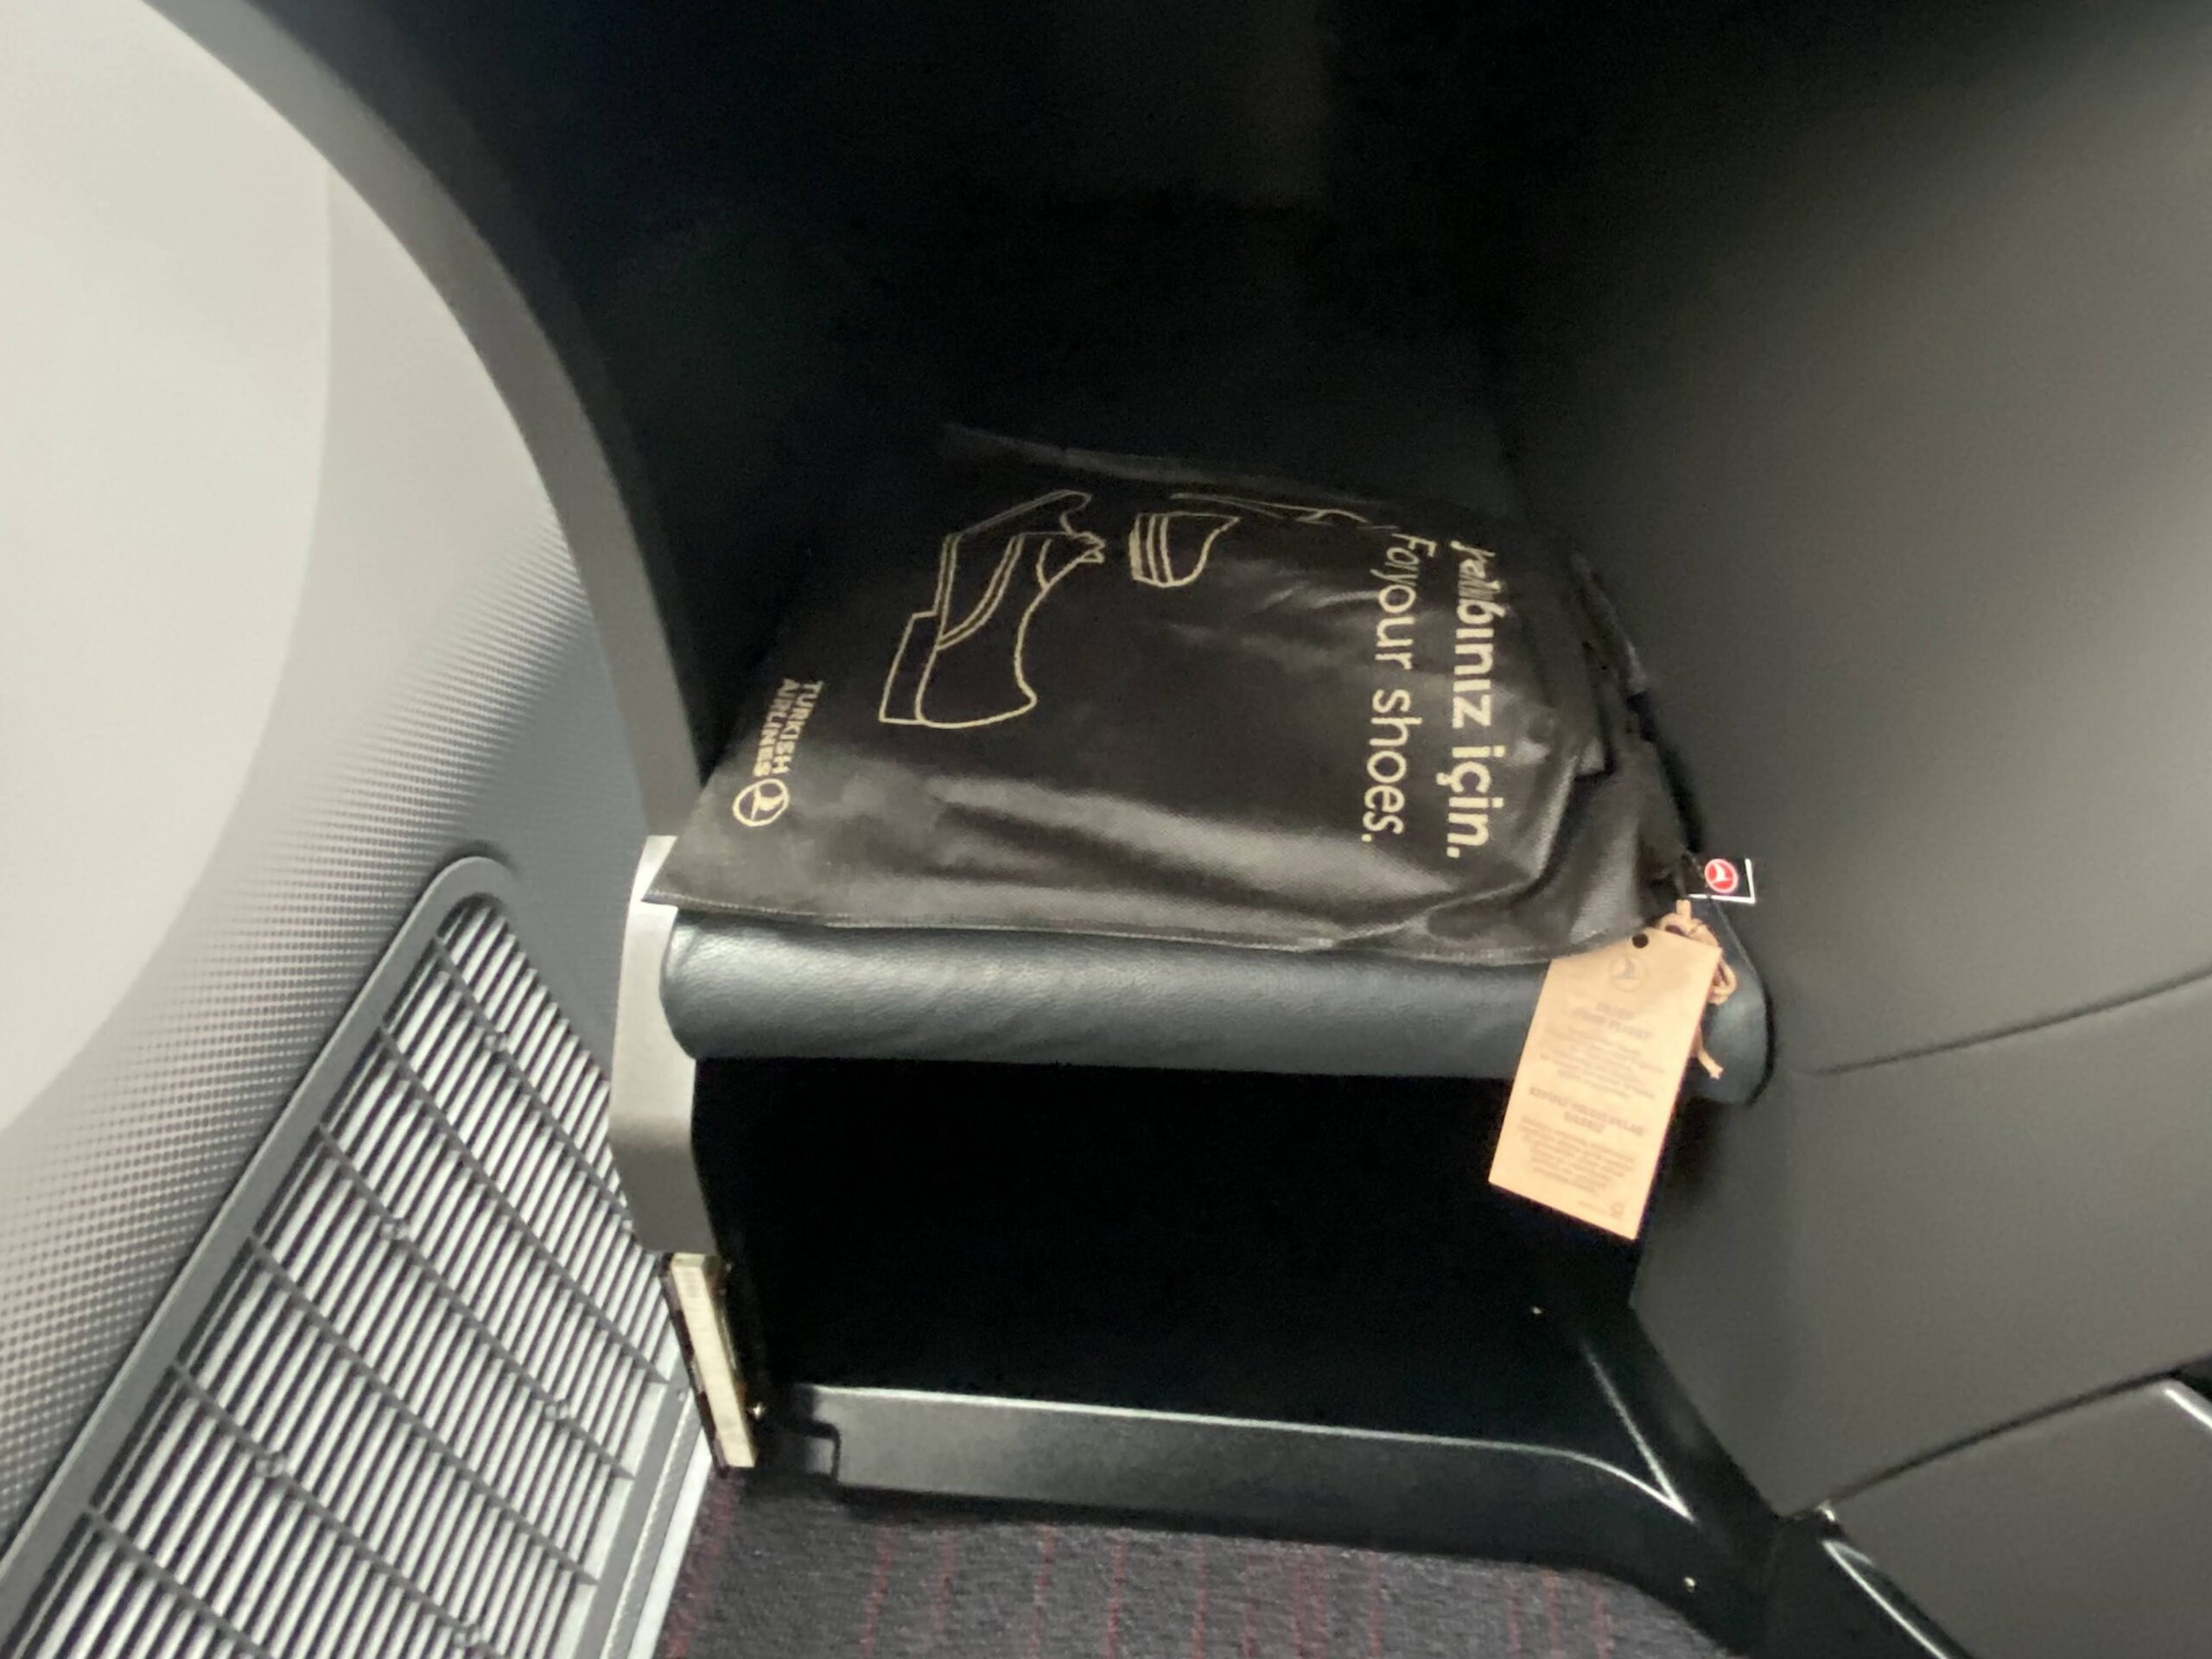 a black bag with white text on it